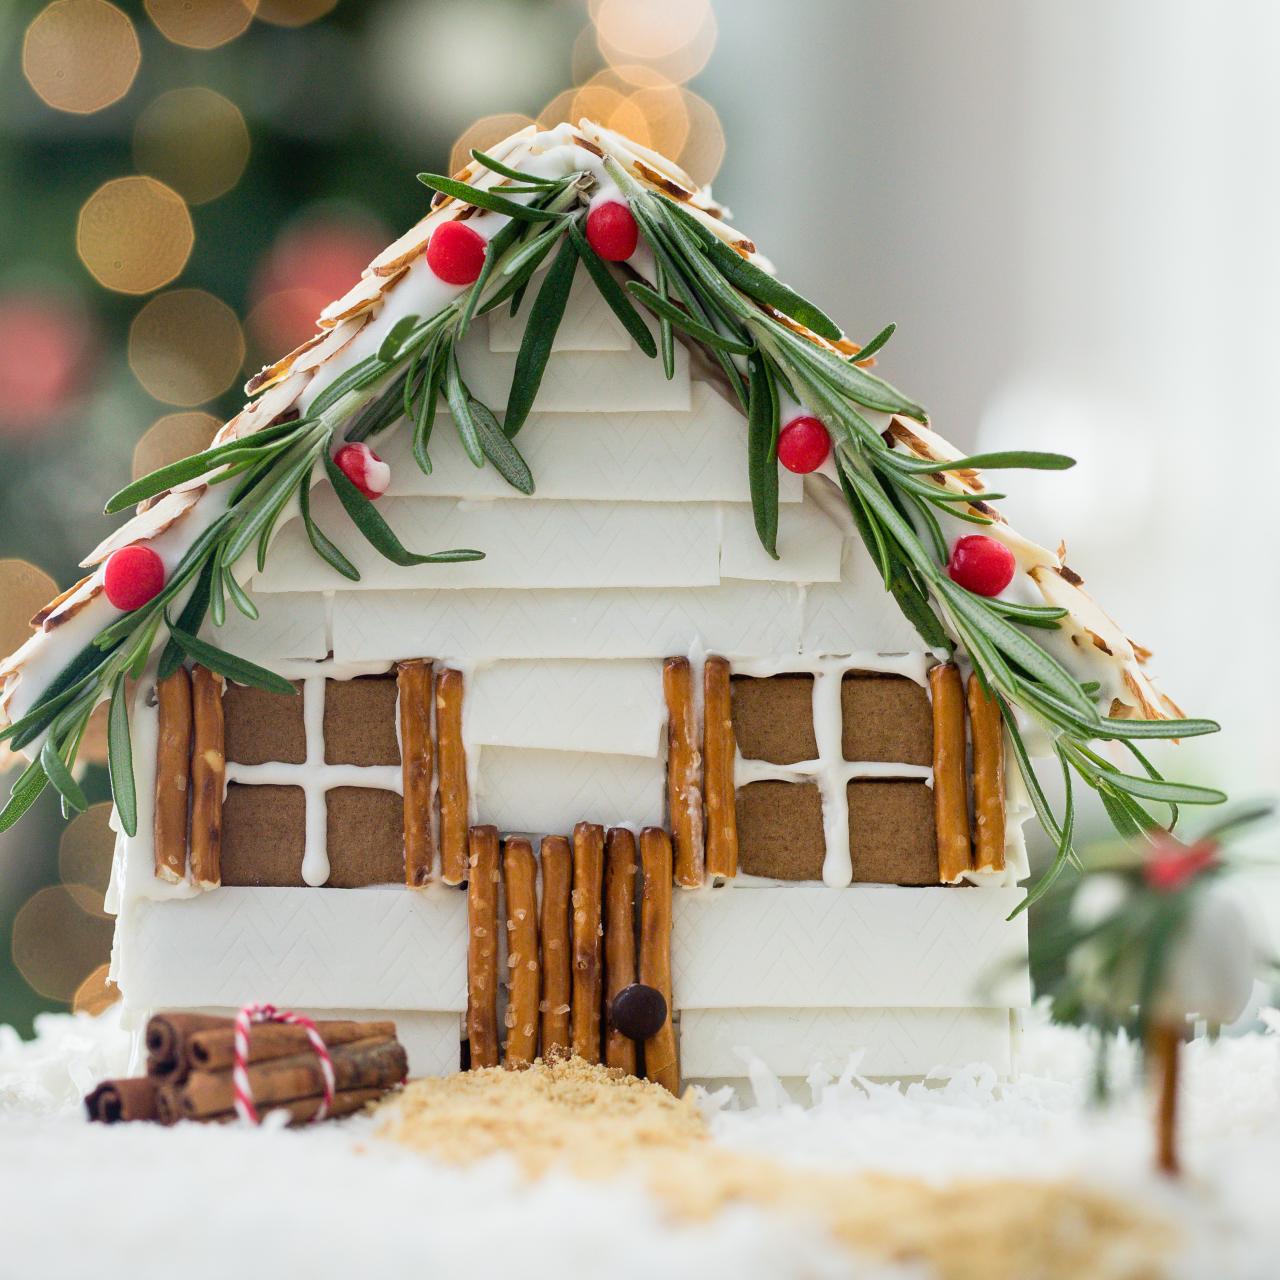 Prepare Your Home for the Holidays with Frasier Fir and Gingerbread!